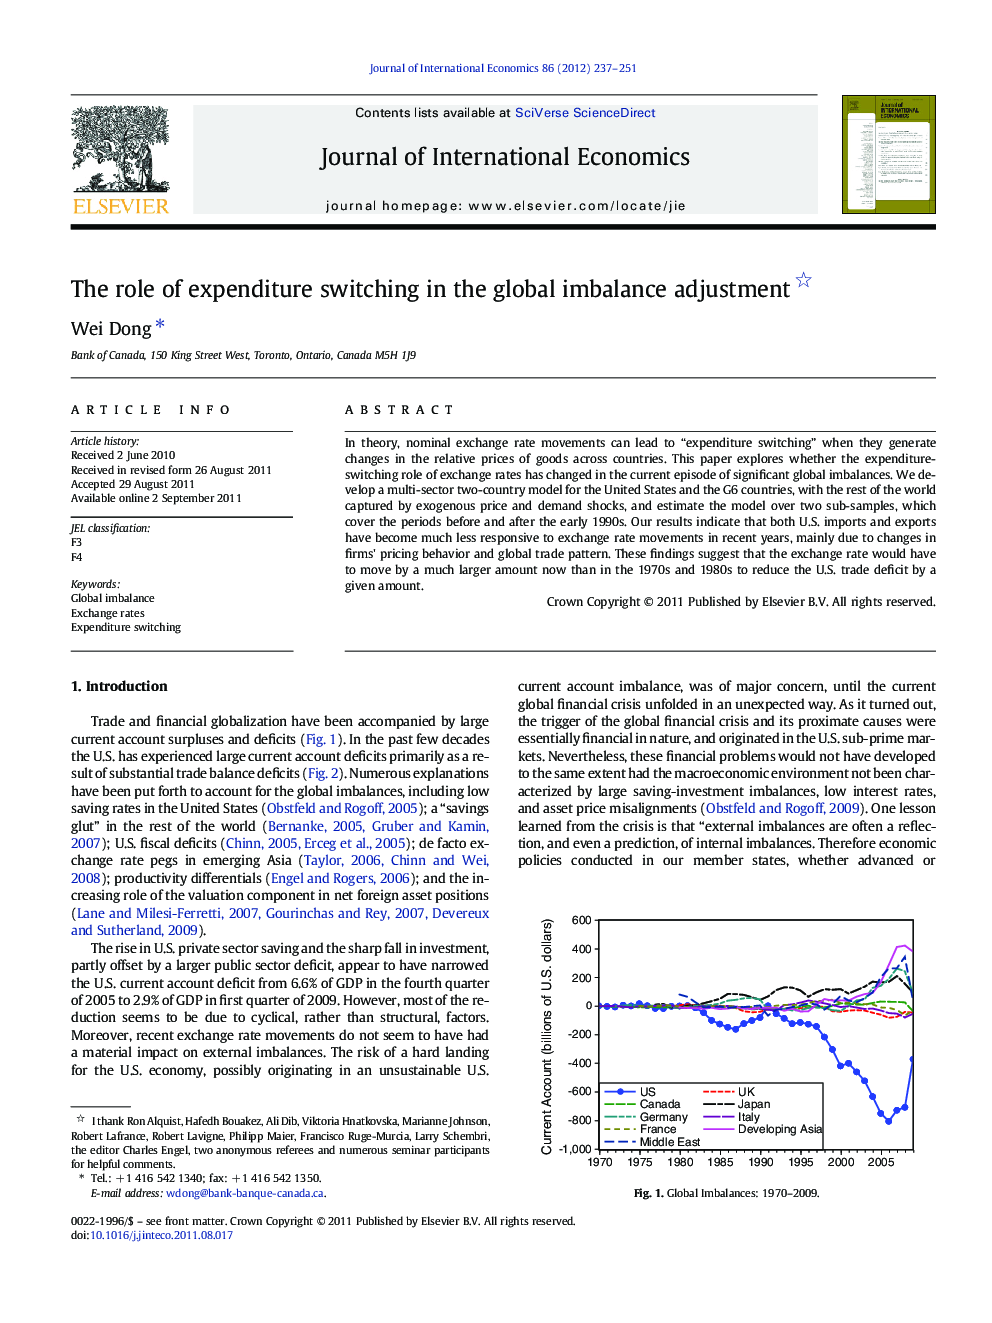 The role of expenditure switching in the global imbalance adjustment